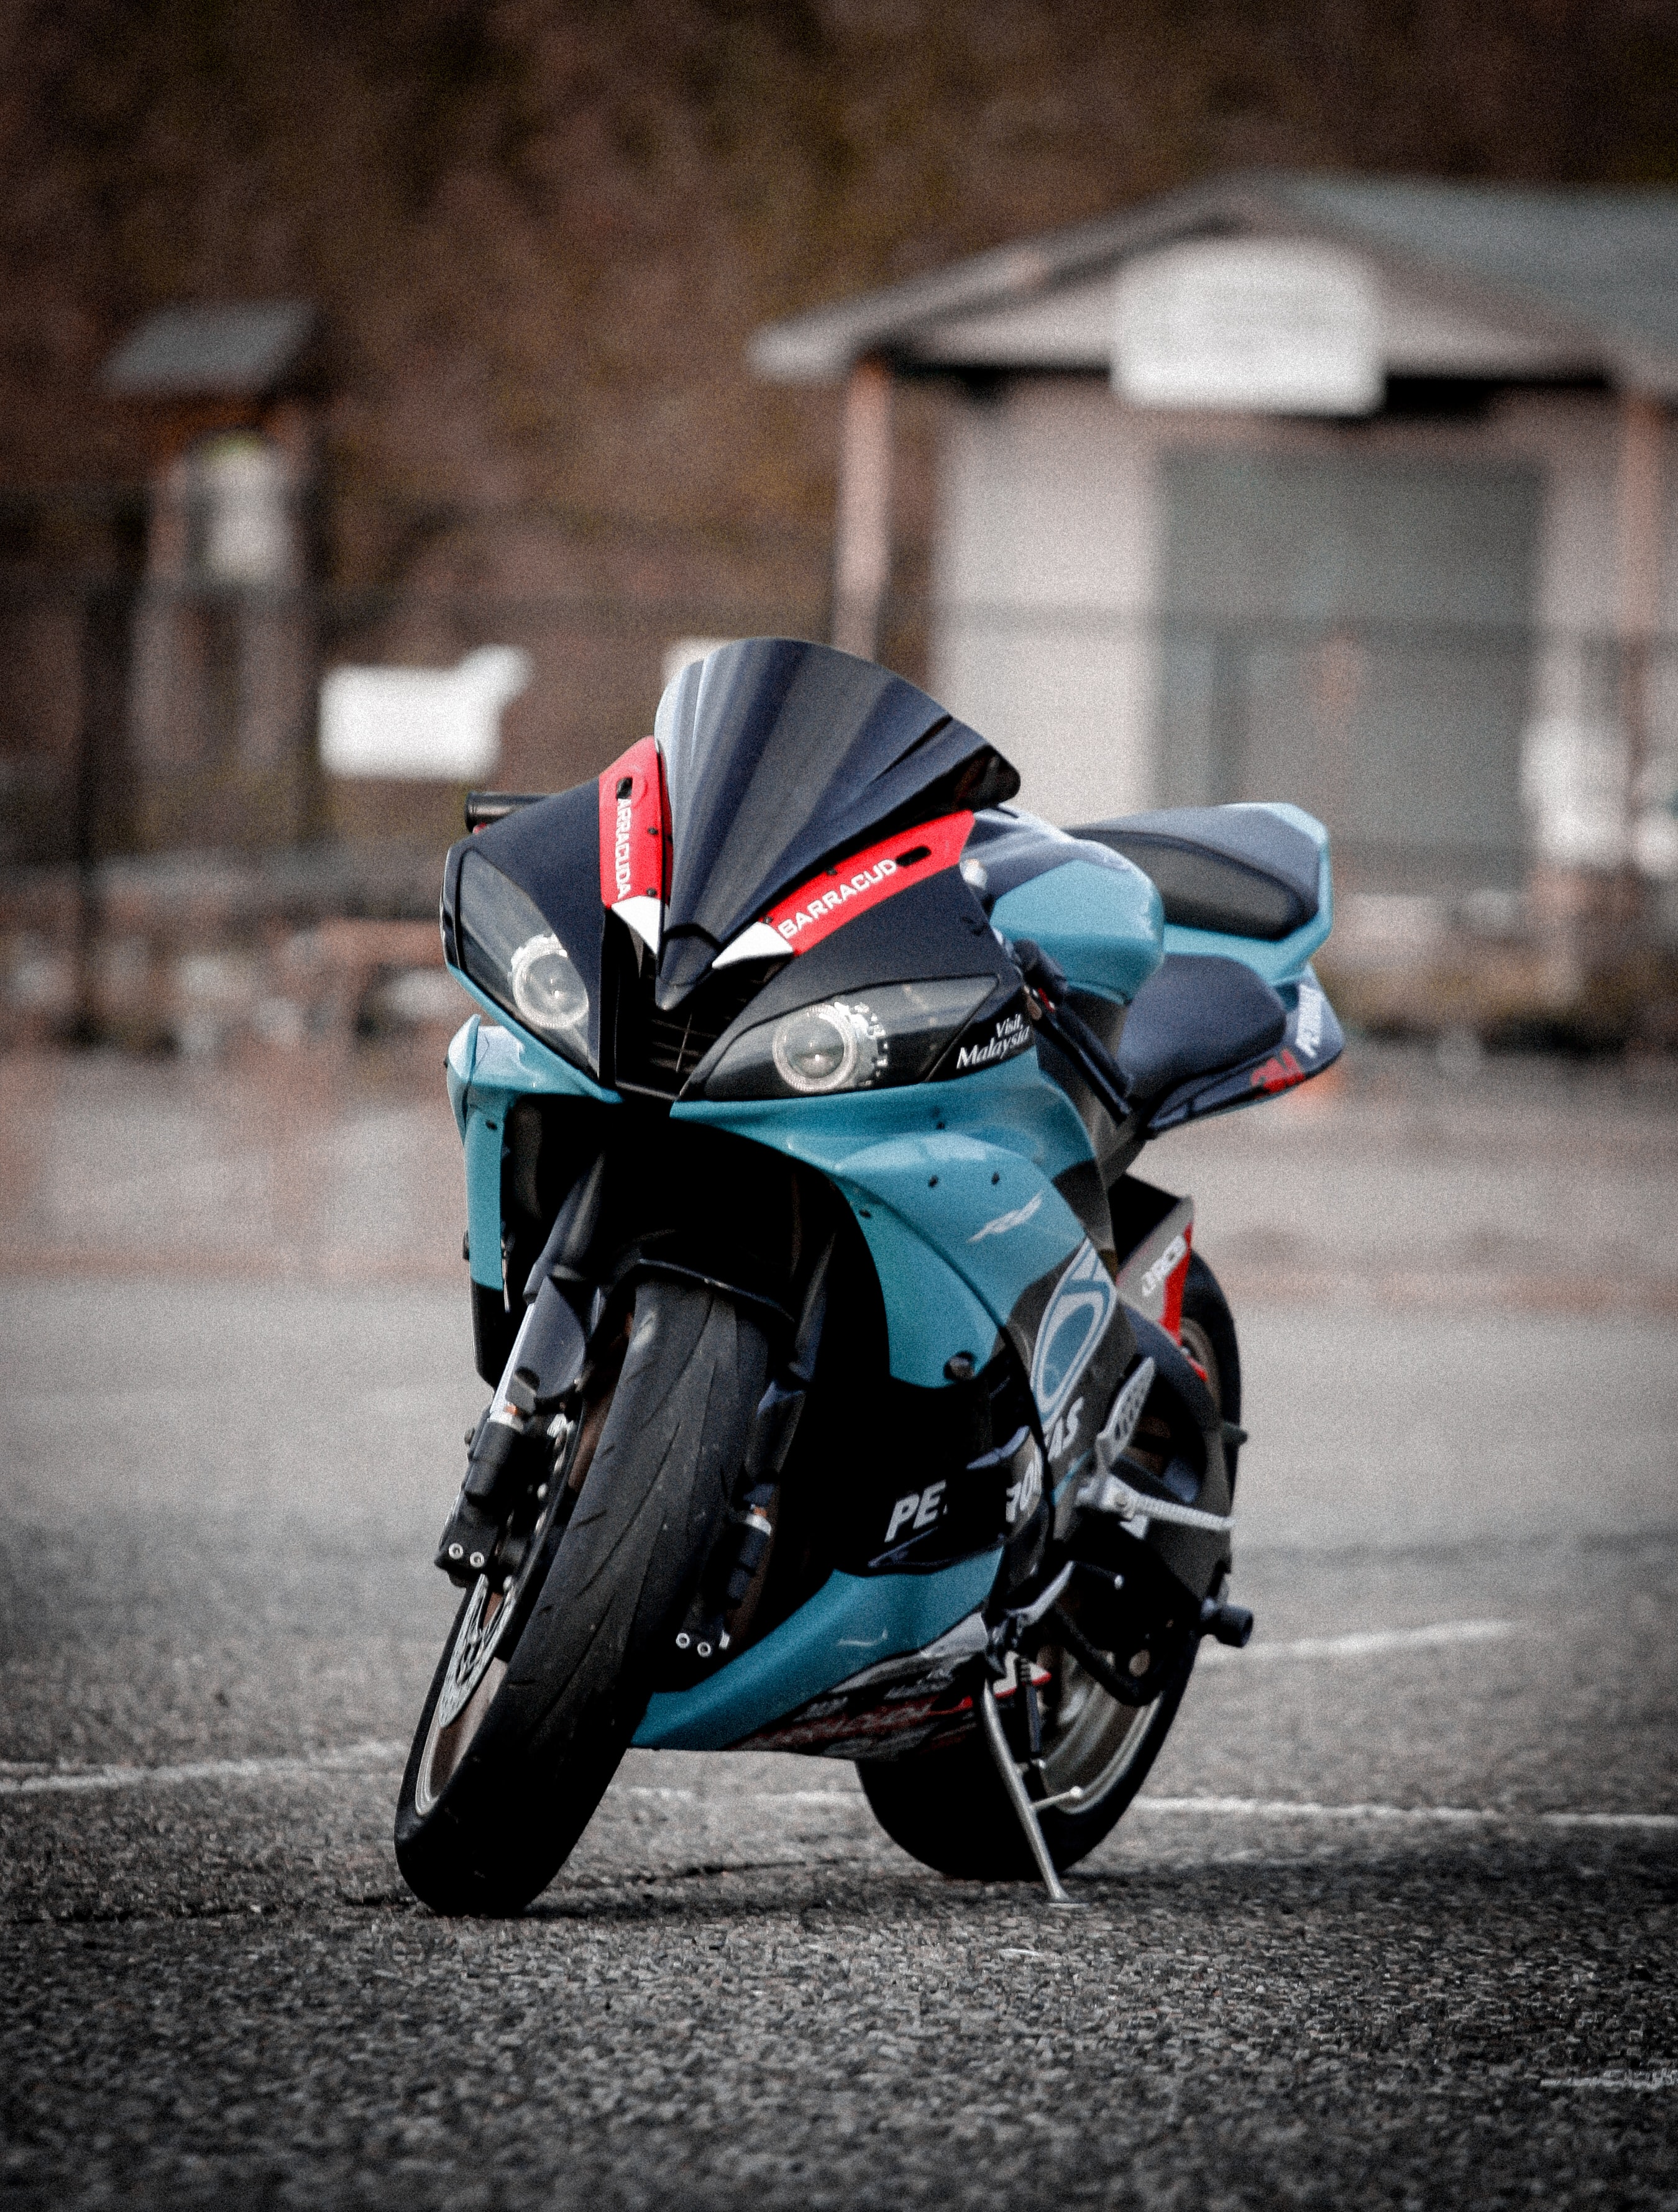 Motorcycles Wallpaper For Mobile Phone